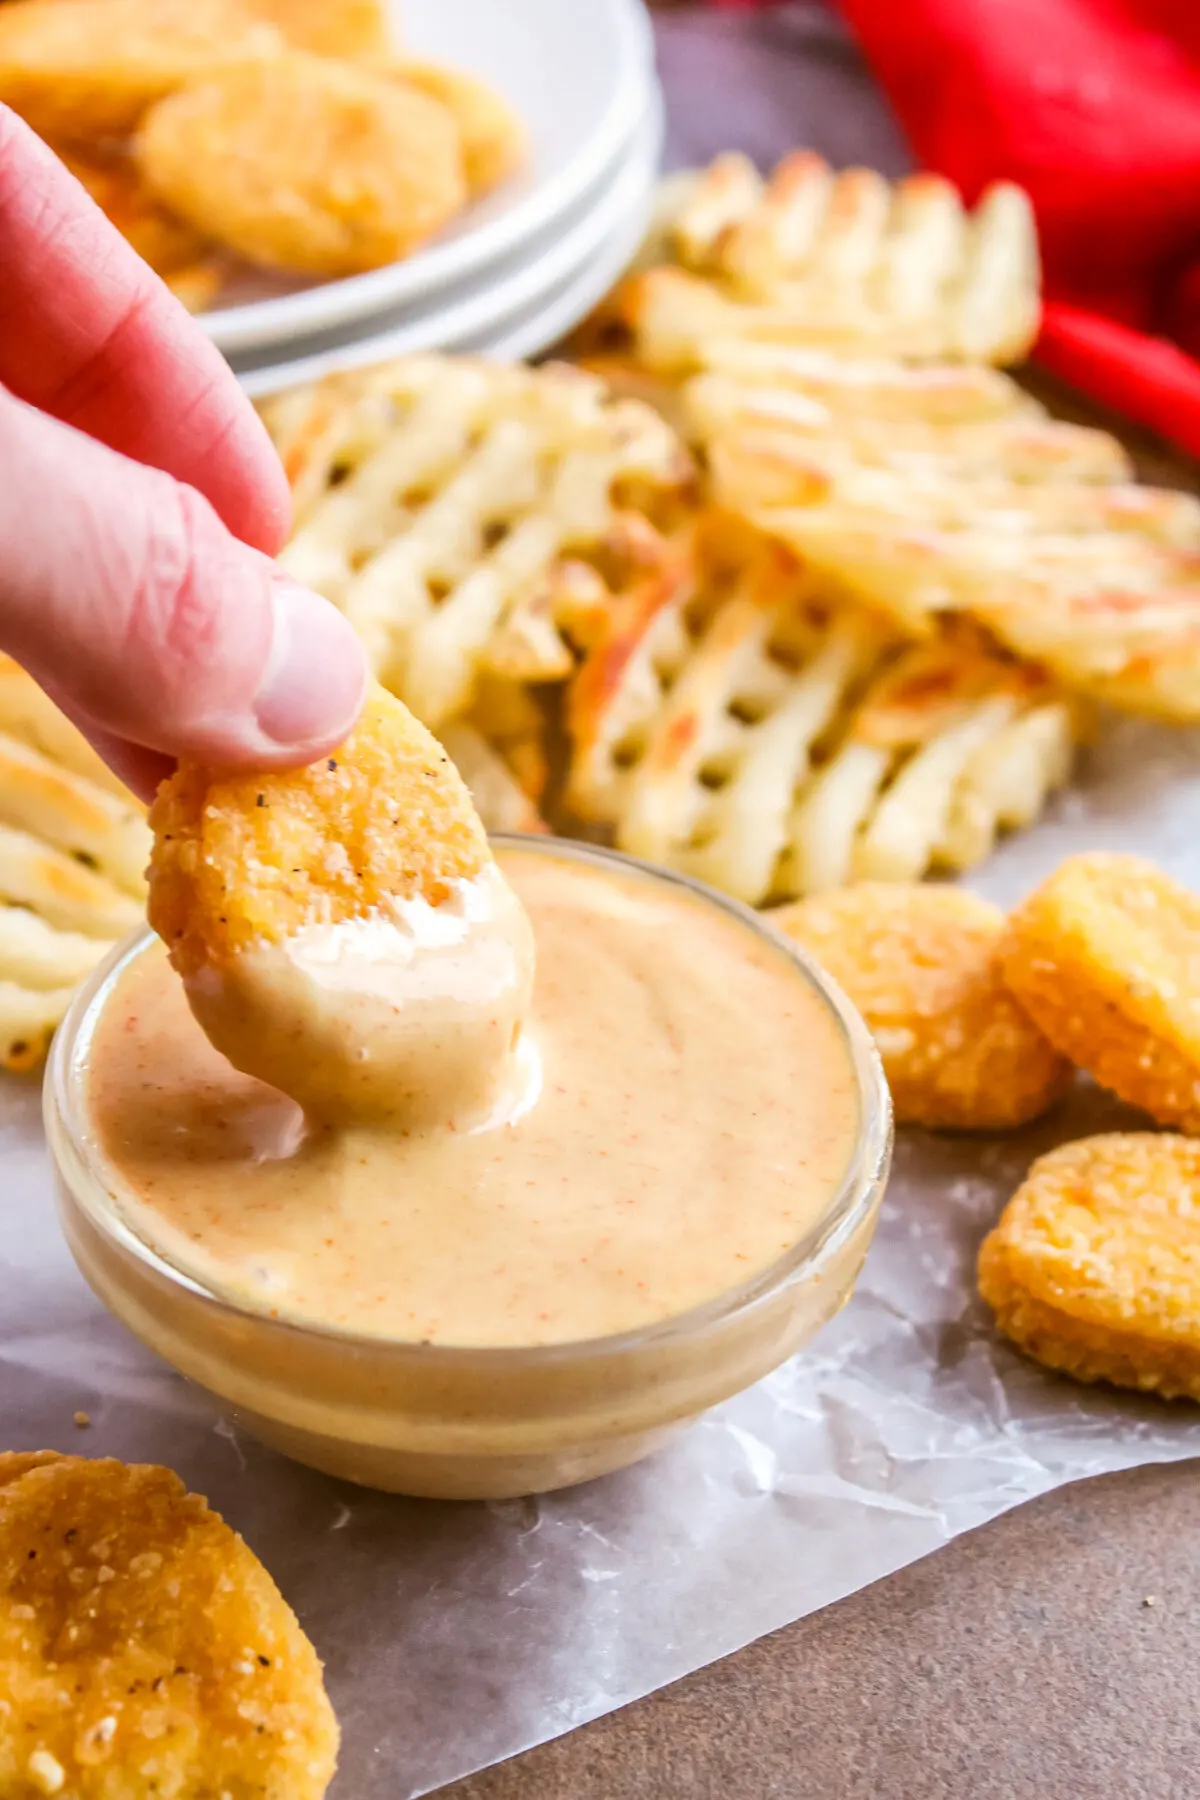 Love Chick-Fil-A? Wish you could make their delicious sauce at home? Now you can with this easy Copycat Chick-Fil-A Sauce Recipe!